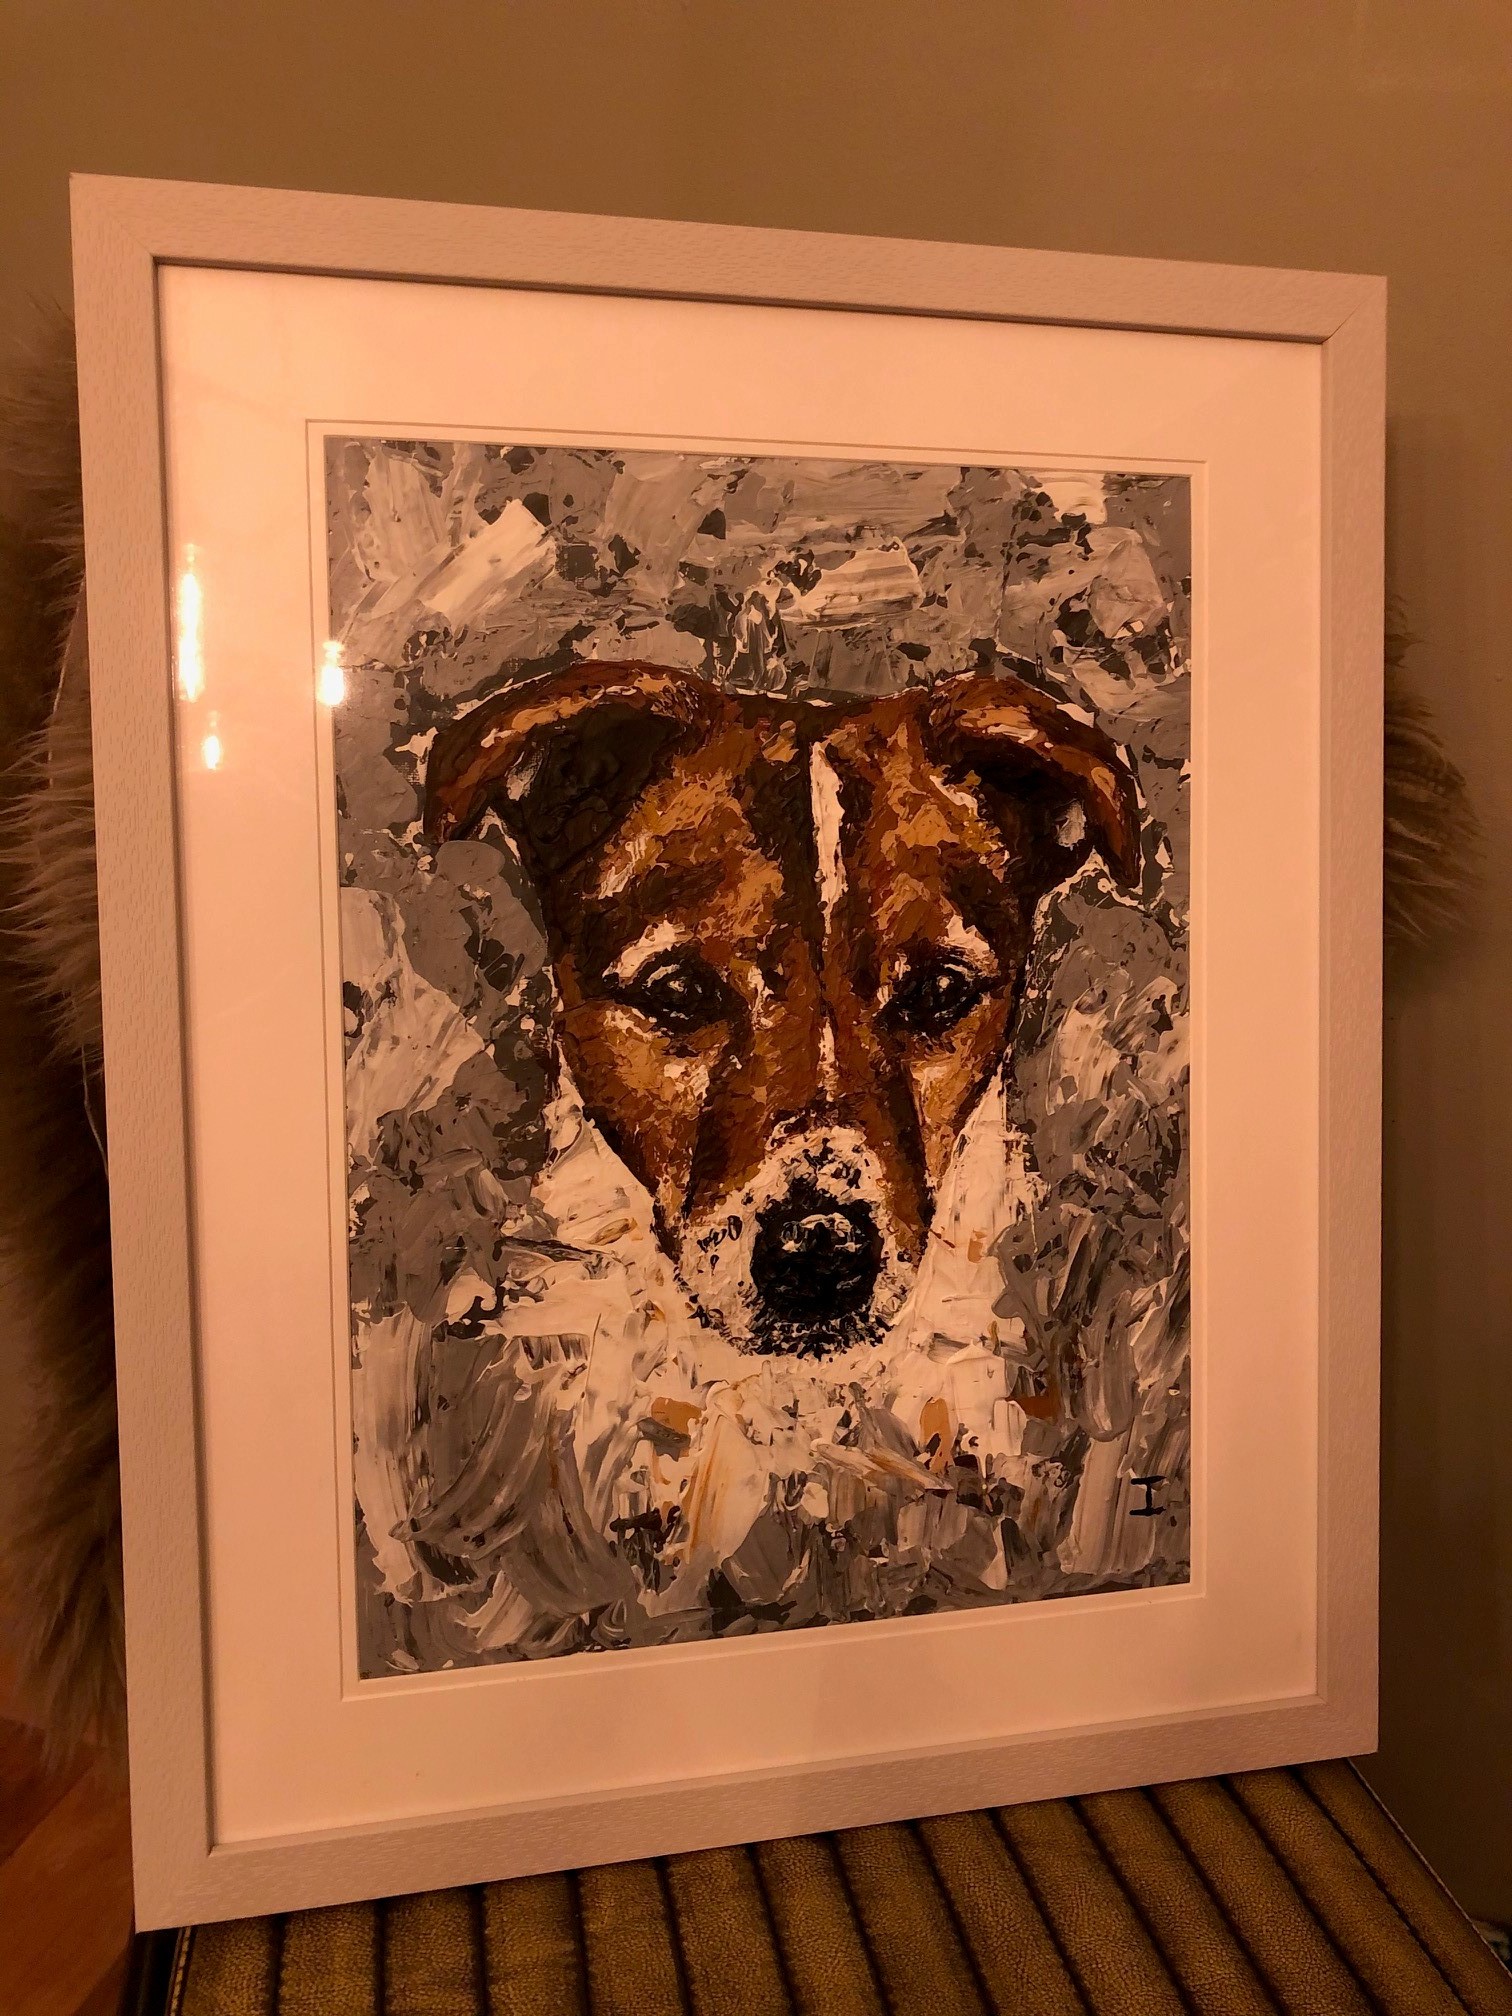 Palette knife painting art portrait of a jack russell